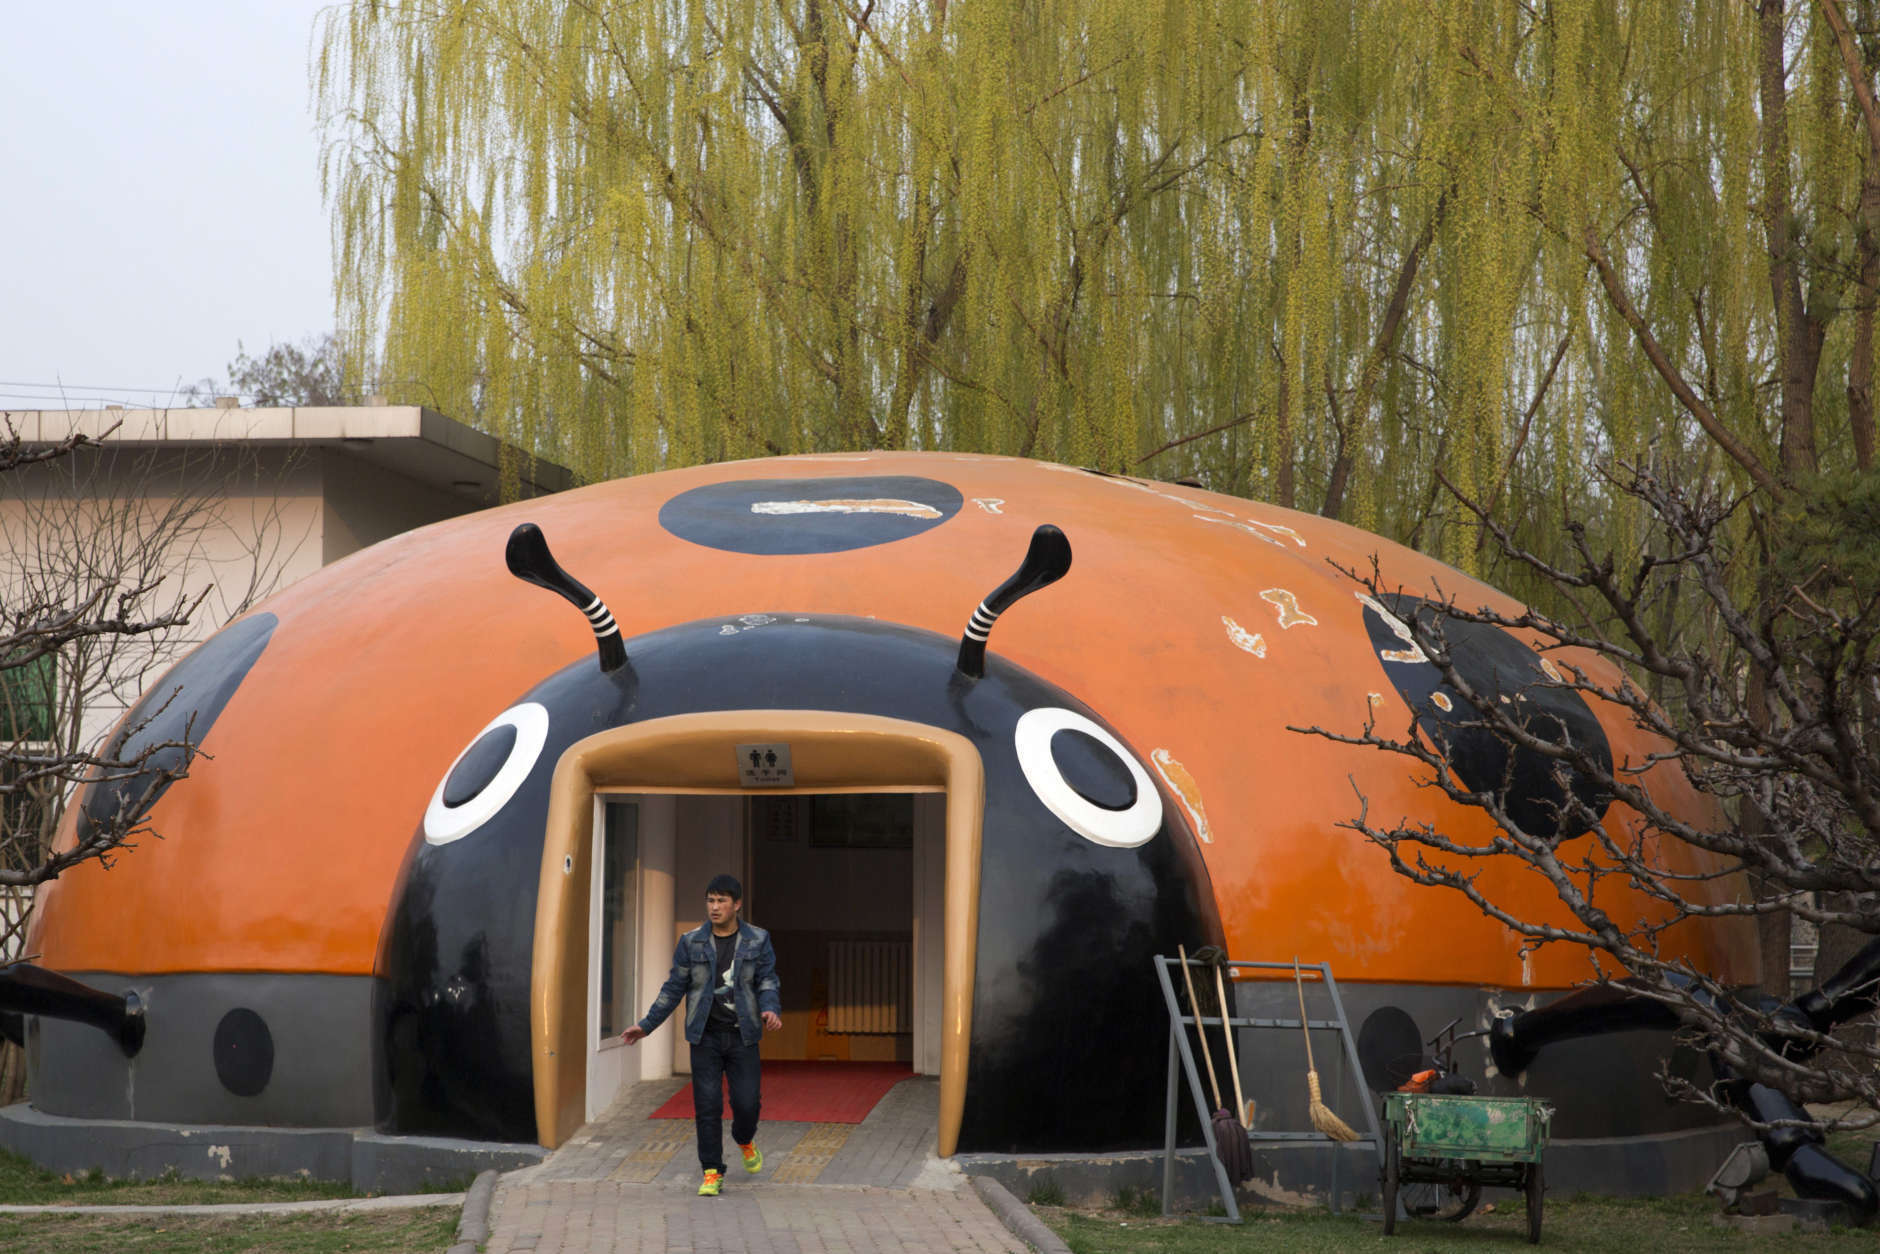 In this photo taken Wednesday, March 29, 2017, a man walks out from a ladybird shaped public toilet in Beijing, China. Launched two years ago, a "toilet revolution" campaign calls for at least 34,000 new public bathrooms to be constructed in Beijing and 23,000 renovated by the end of this year. Authorities are also encouraging the installation of Western-style sit-down commodes rather than the more common squat toilets. Around 25 billion yuan ($3.6 billion) has already been spent on the program, according to the National Tourism Administration. (AP Photo/Ng Han Guan)